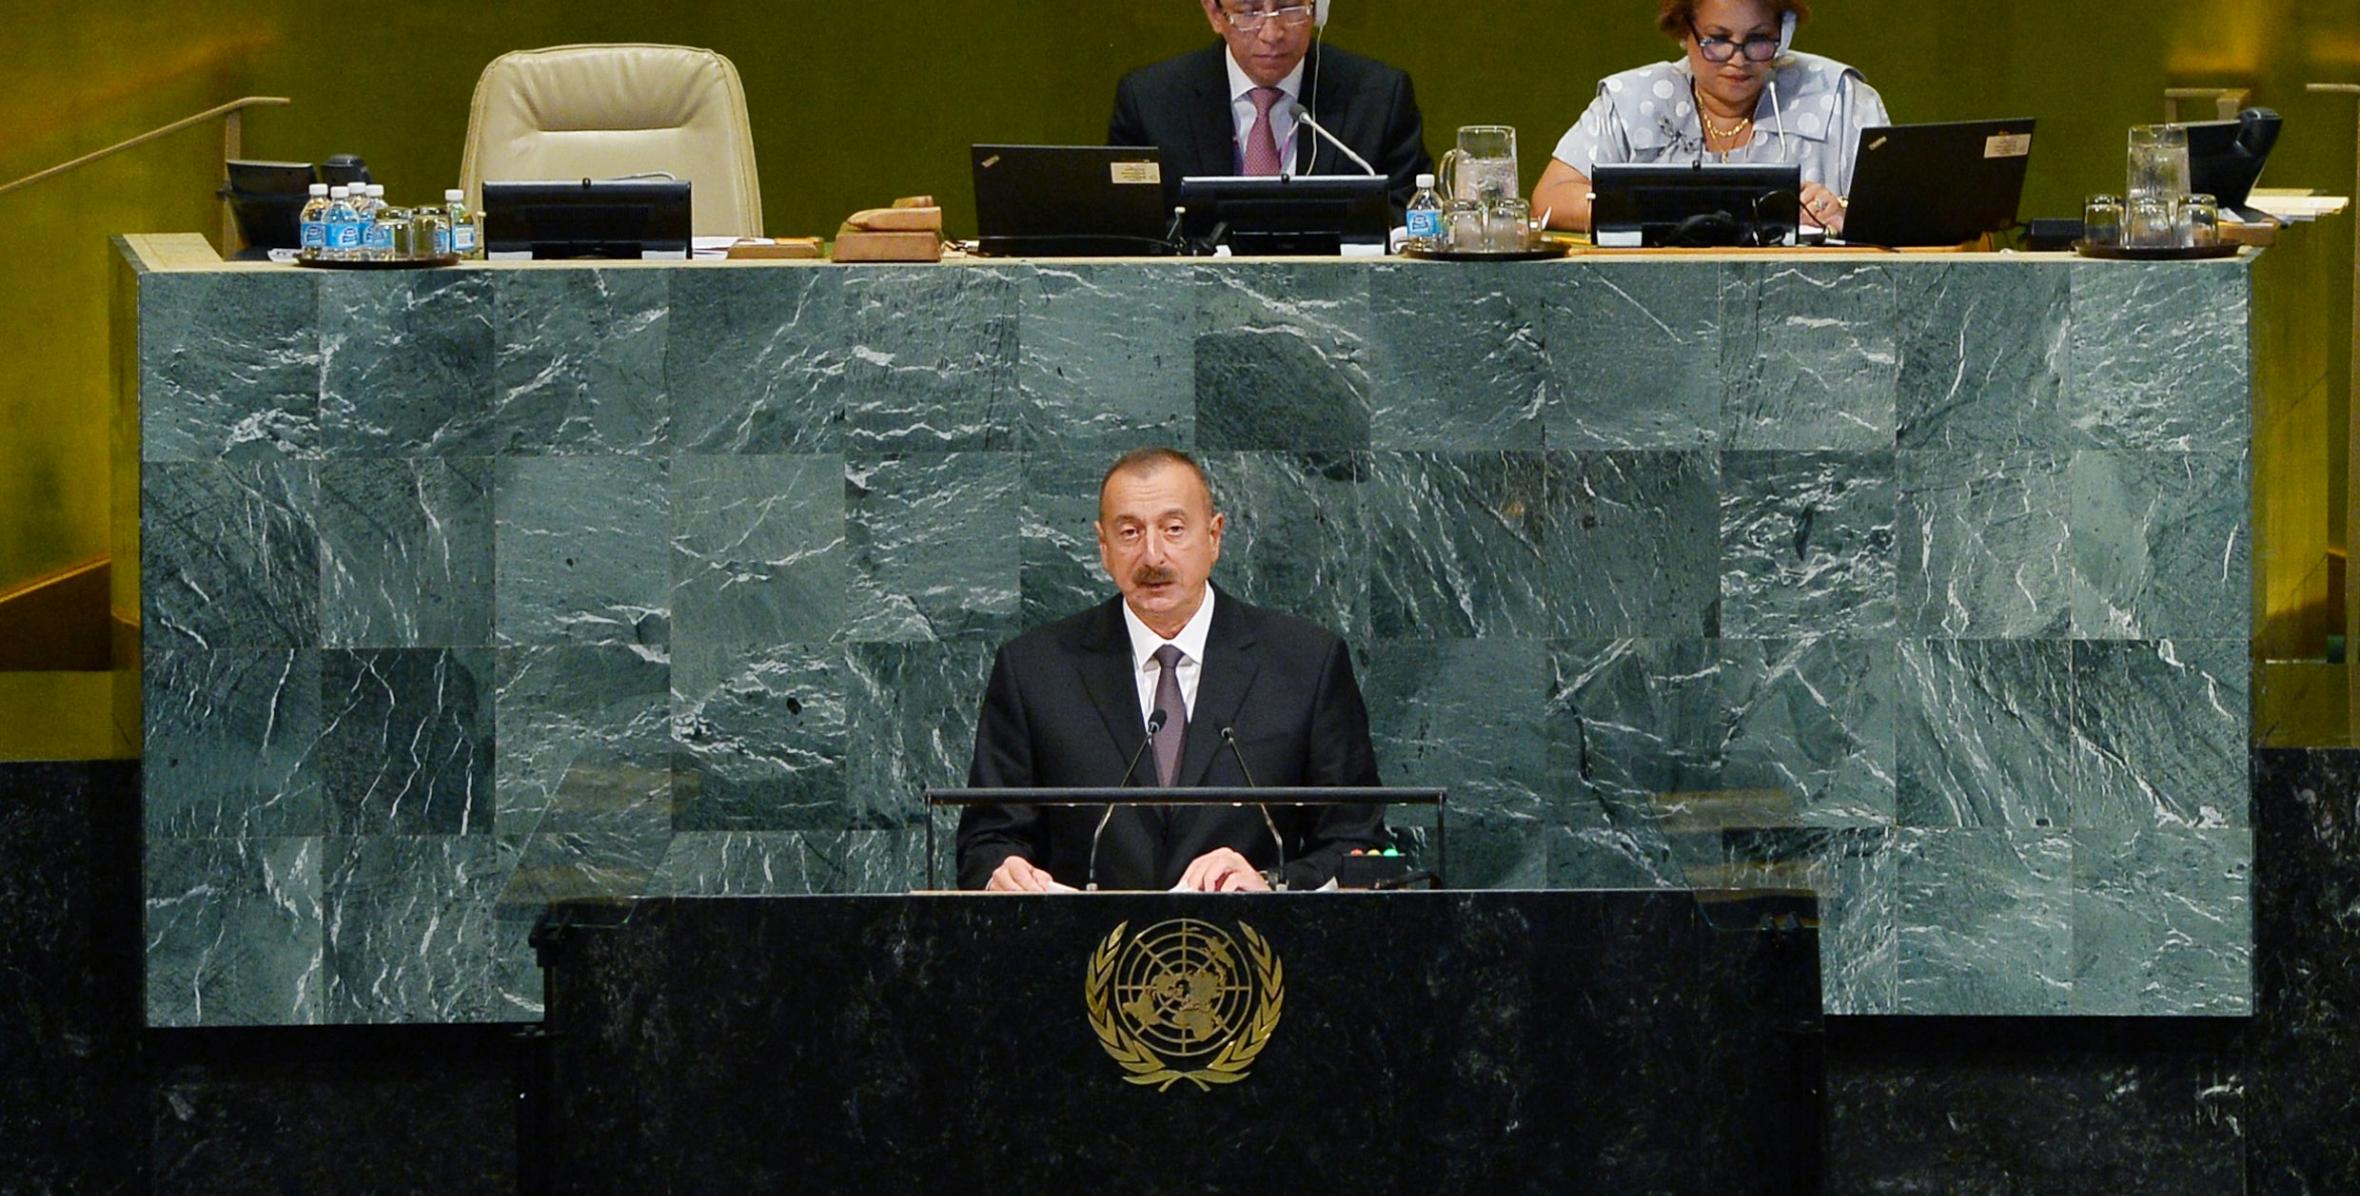 Ilham Aliyev addressed opening of 72nd Session of UN General Assembly